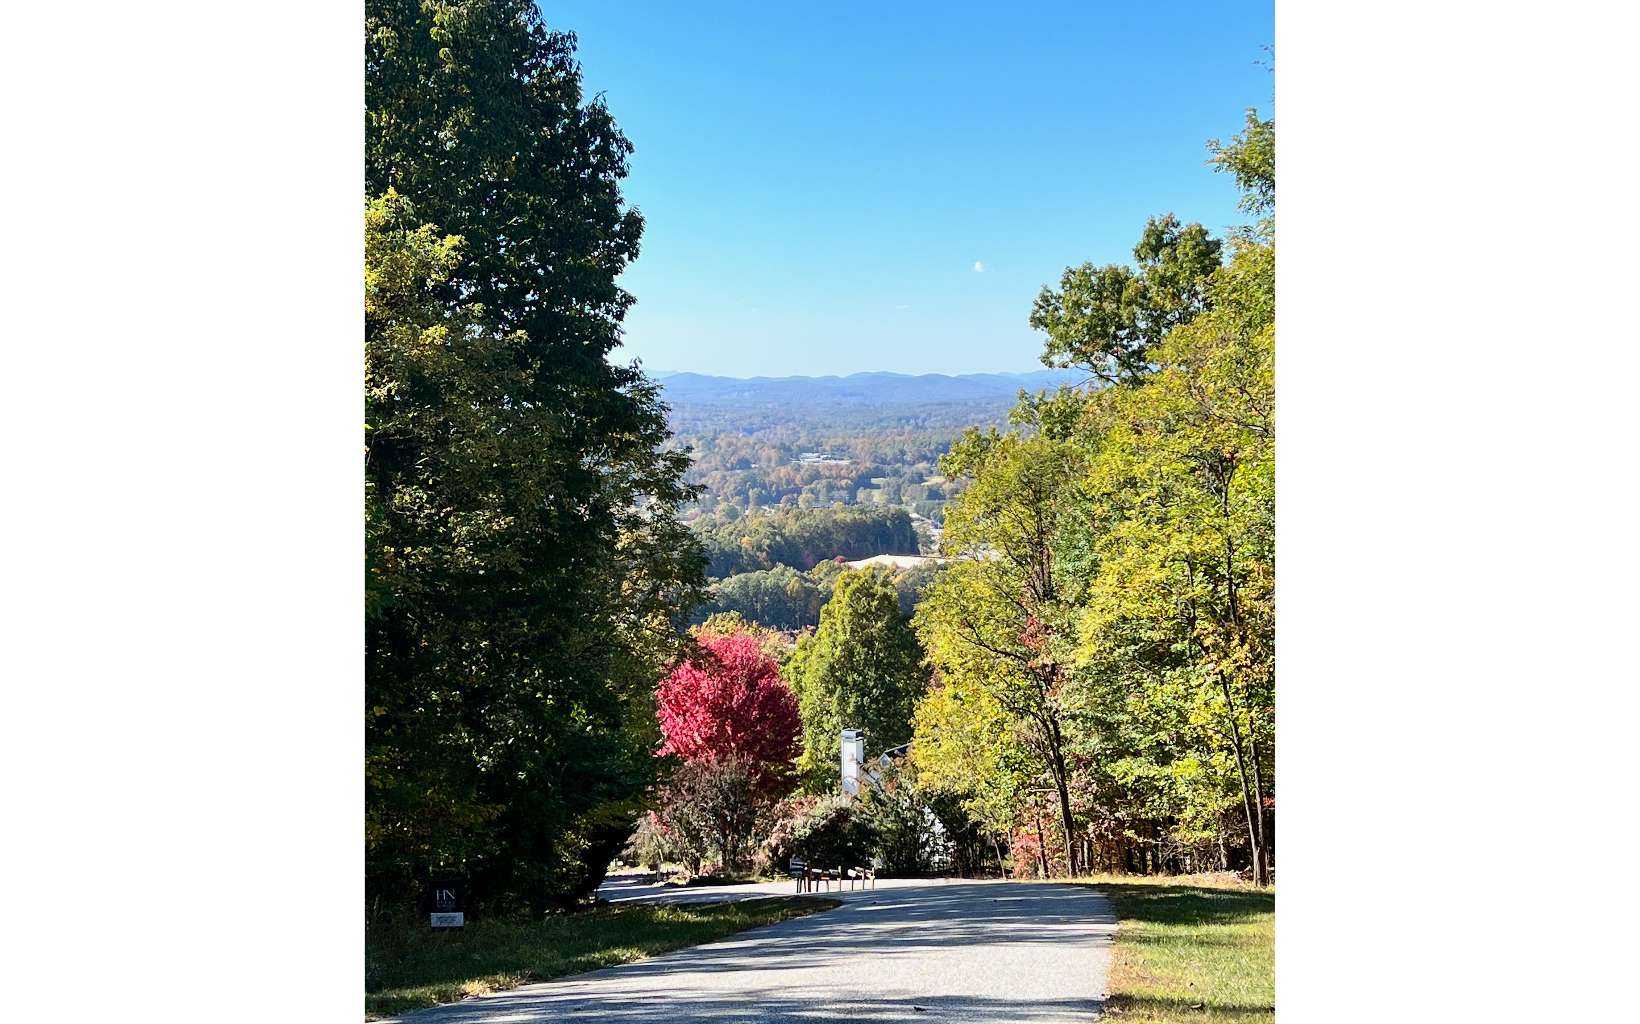 Mountain Views and more Mountain Views! Close to downtown Blairsville in the well established community The Mountain. This lot offers paved road access with some of the best views around.